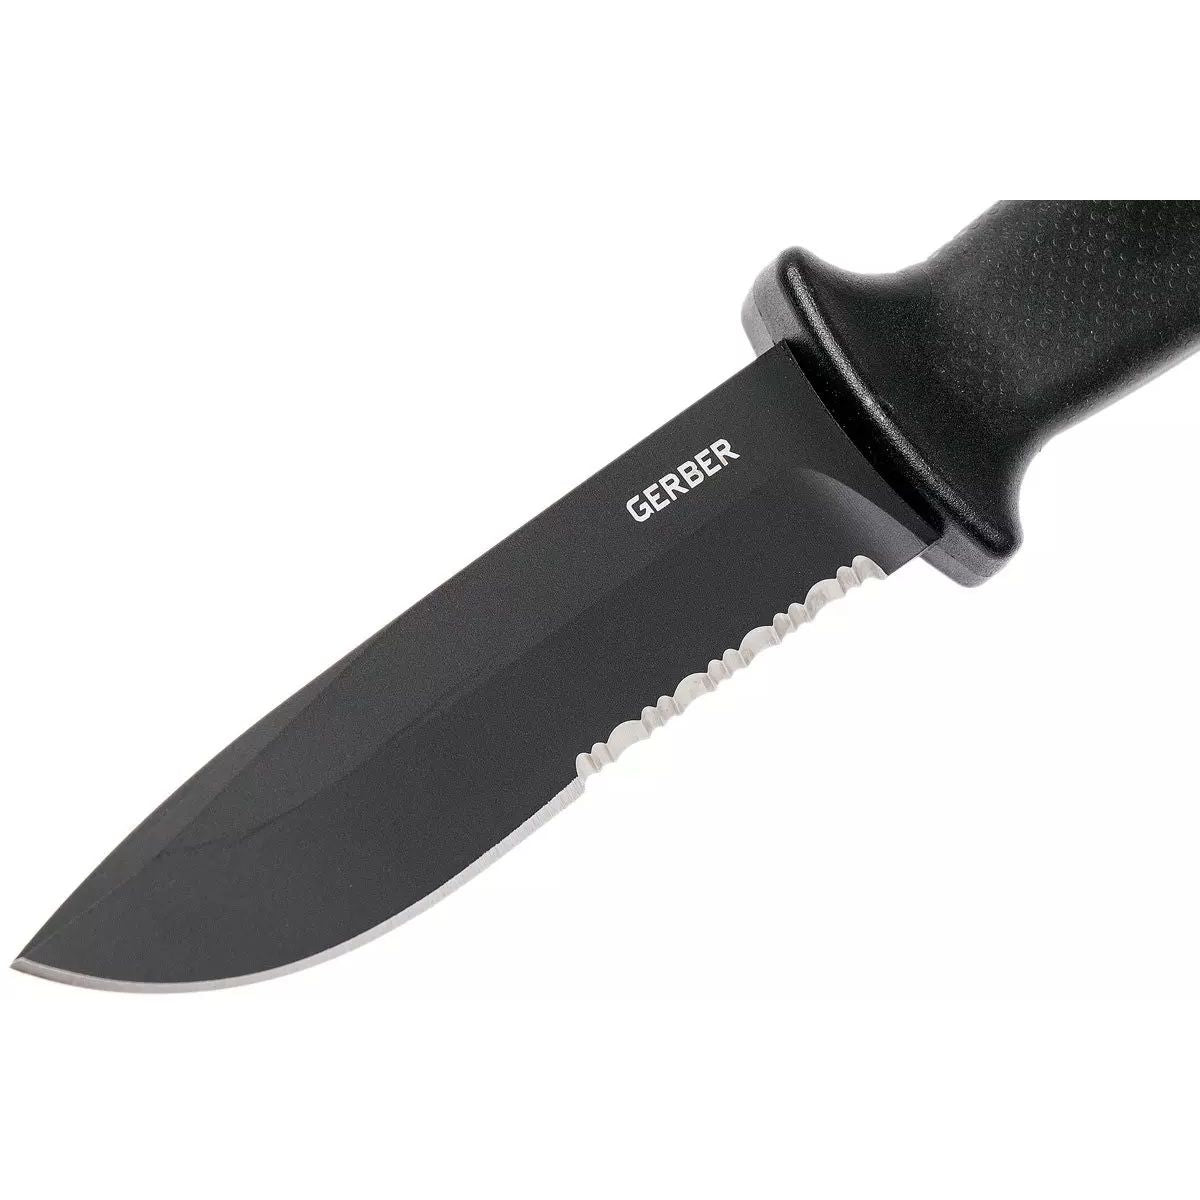 Gerber Prodigy Serrated Fixed Blade Survival Knife - Black 5